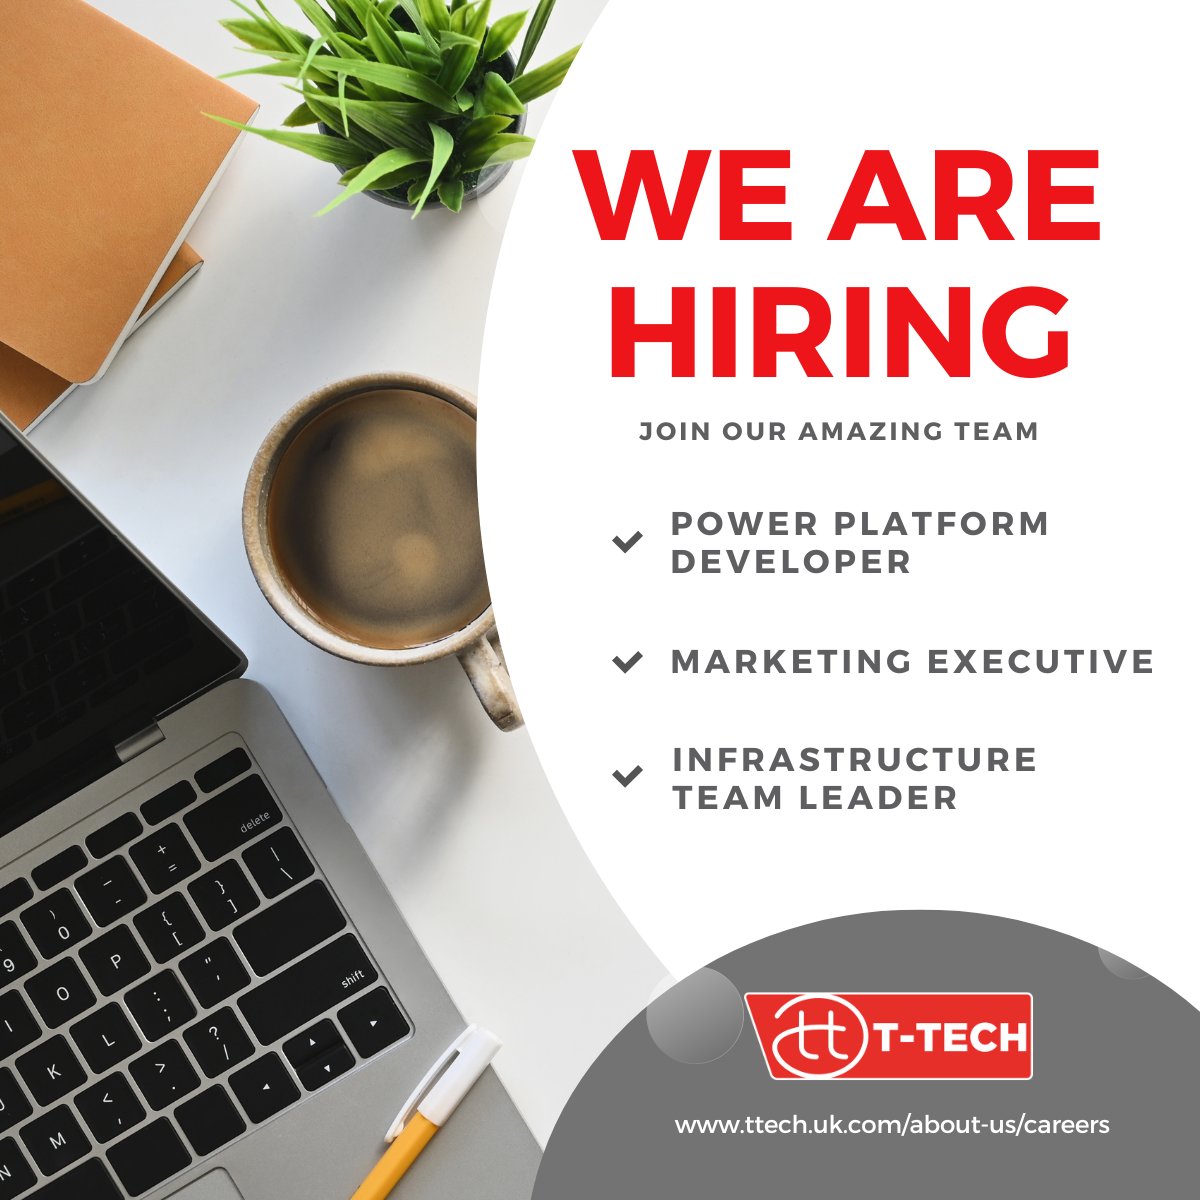 Looking to work in a dynamic environment with endless opportunities for growth? See our career opportunities and join the team🚨 hubs.ly/Q01VPcYg0 #newroles #techjobs #hiring